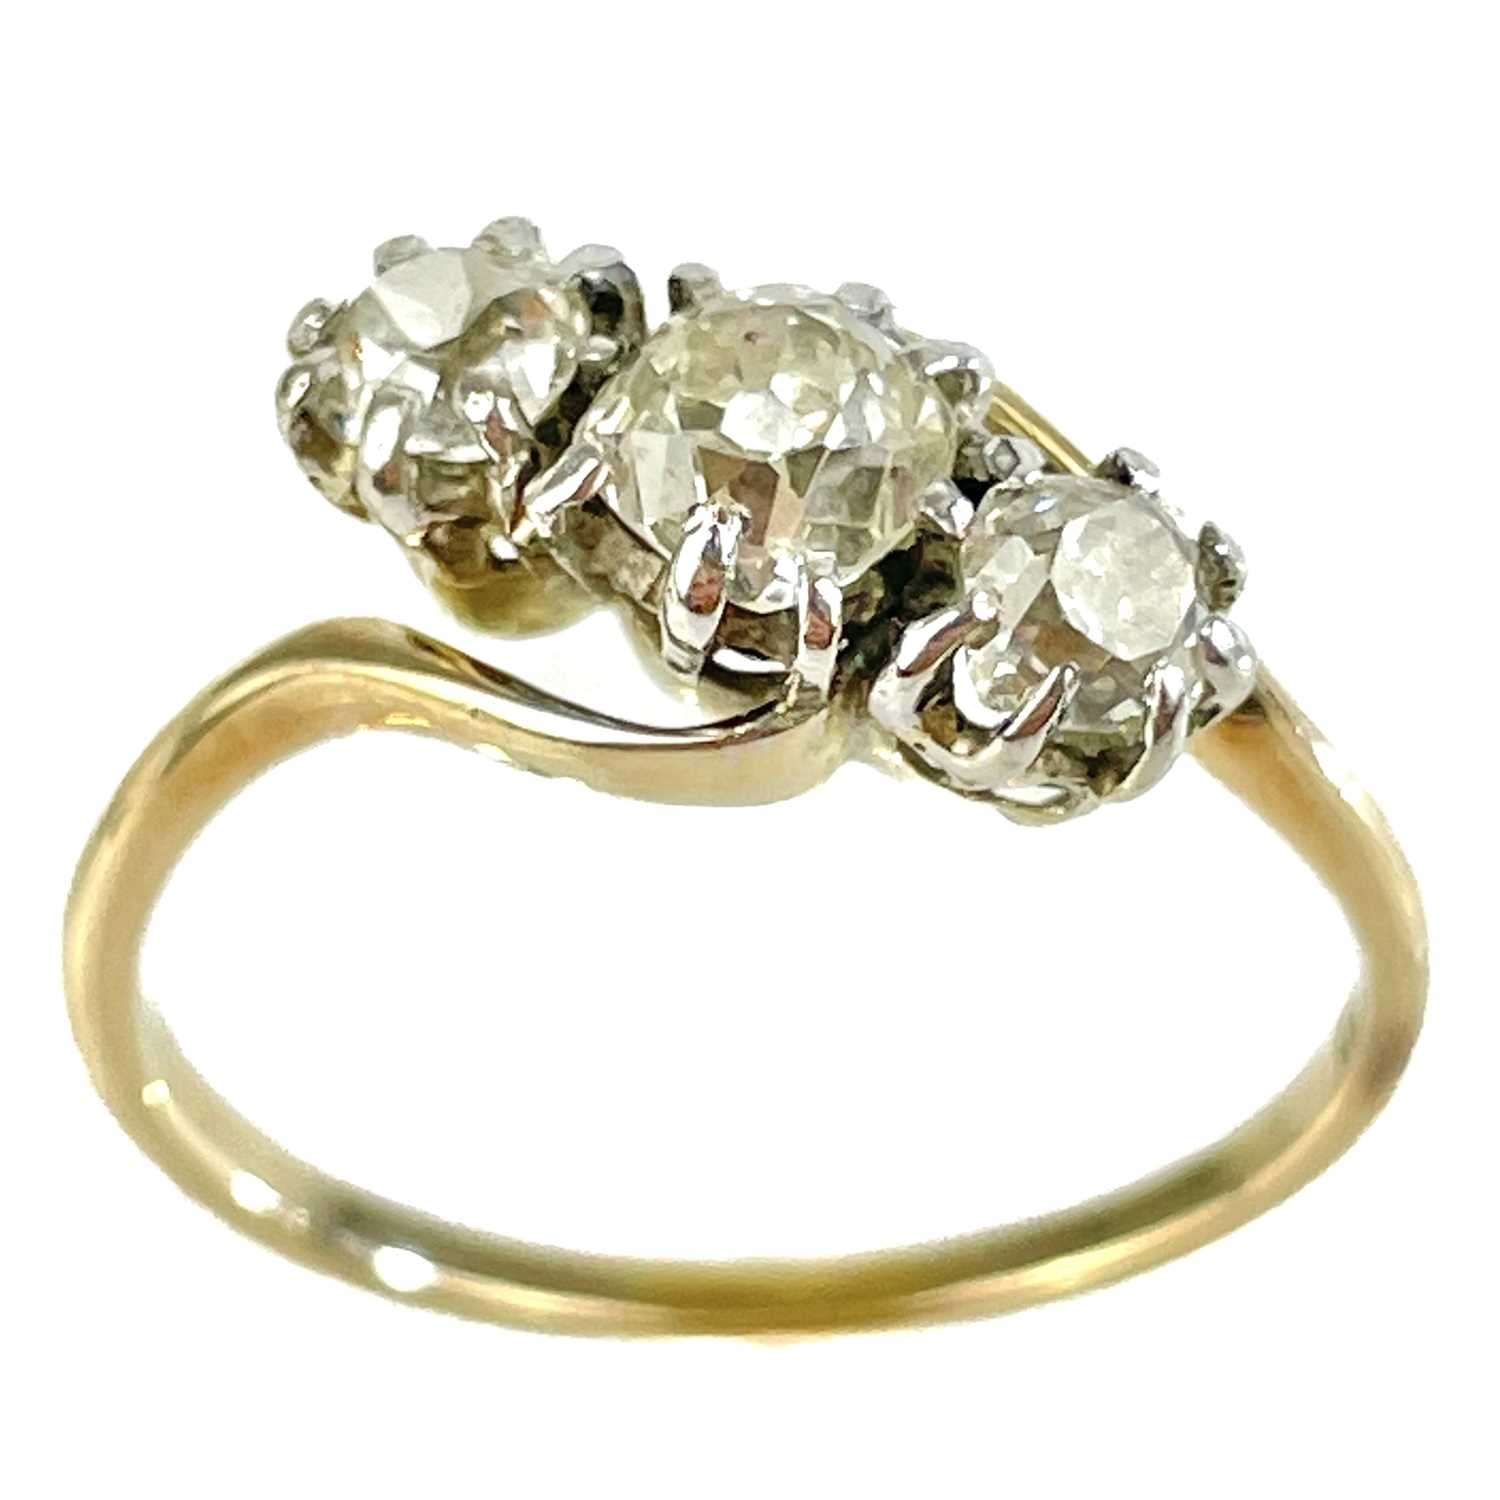 An early 20th century 18ct gold diamond set three stone crossover ring.